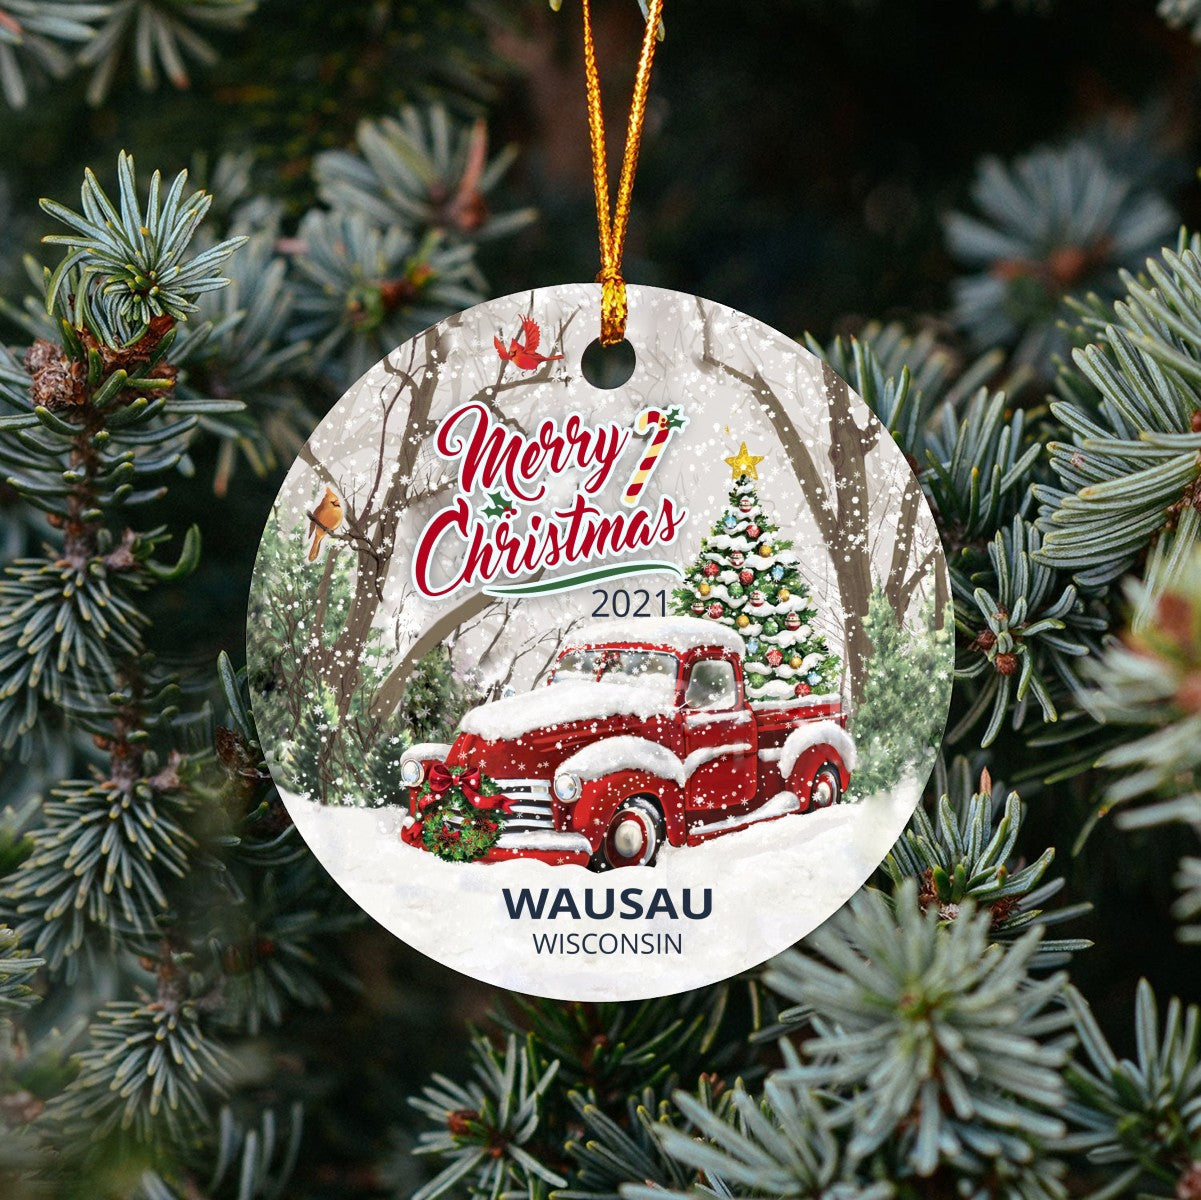 Christmas Tree Ornaments Wausau - Ornament Customize With Name City And State Wausau Wisconsin WI - Red Truck Xmas Ornaments 3'' Plastic Gift For Family, Friend And Housewarming